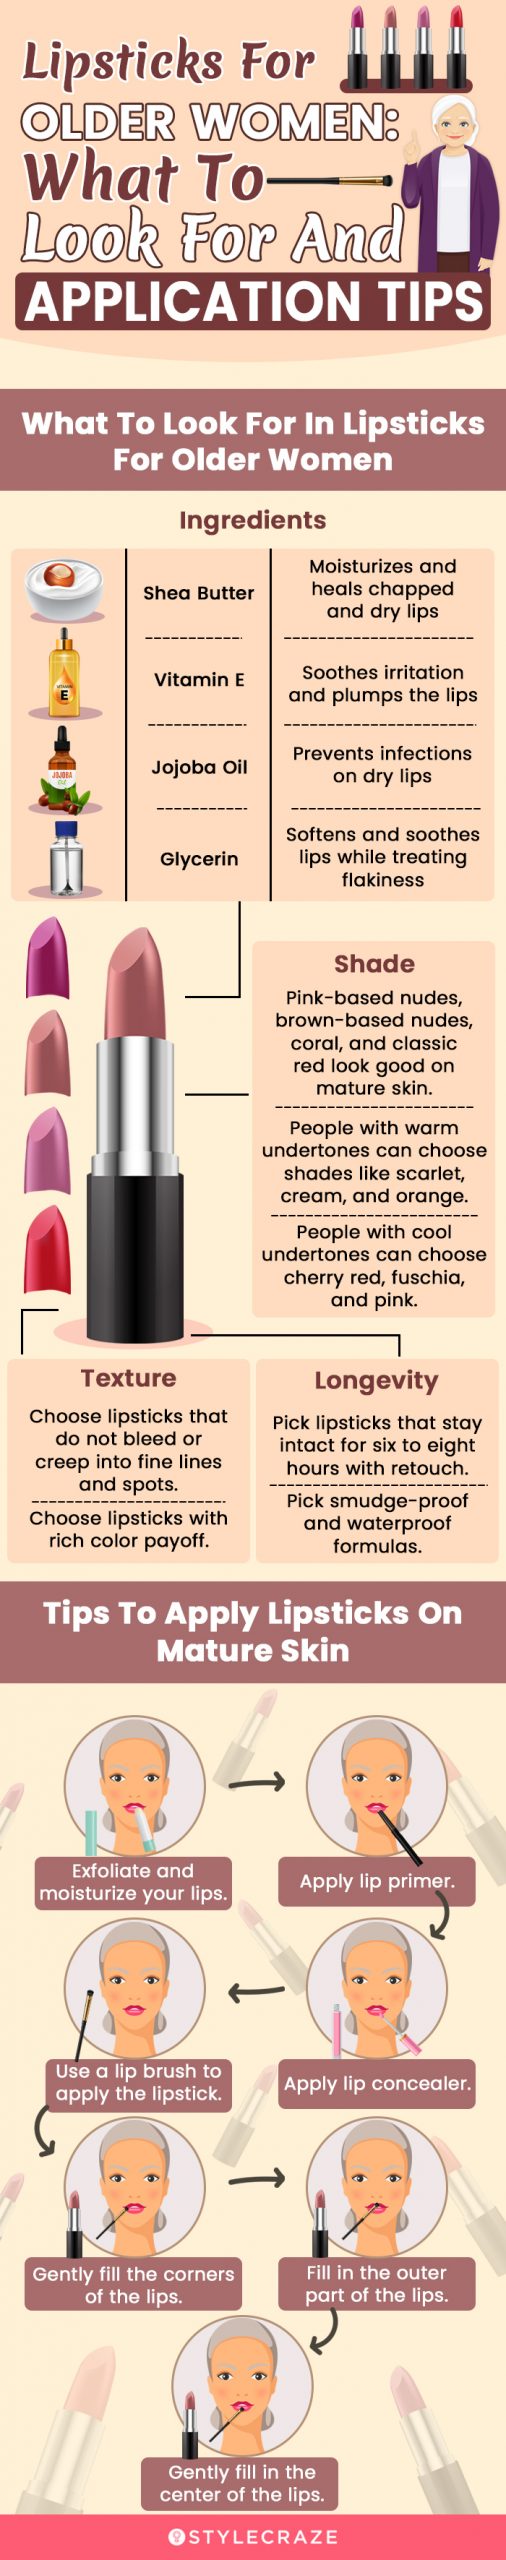 Lipsticks For Older Women: What To Look For & Application Tips [infographic]